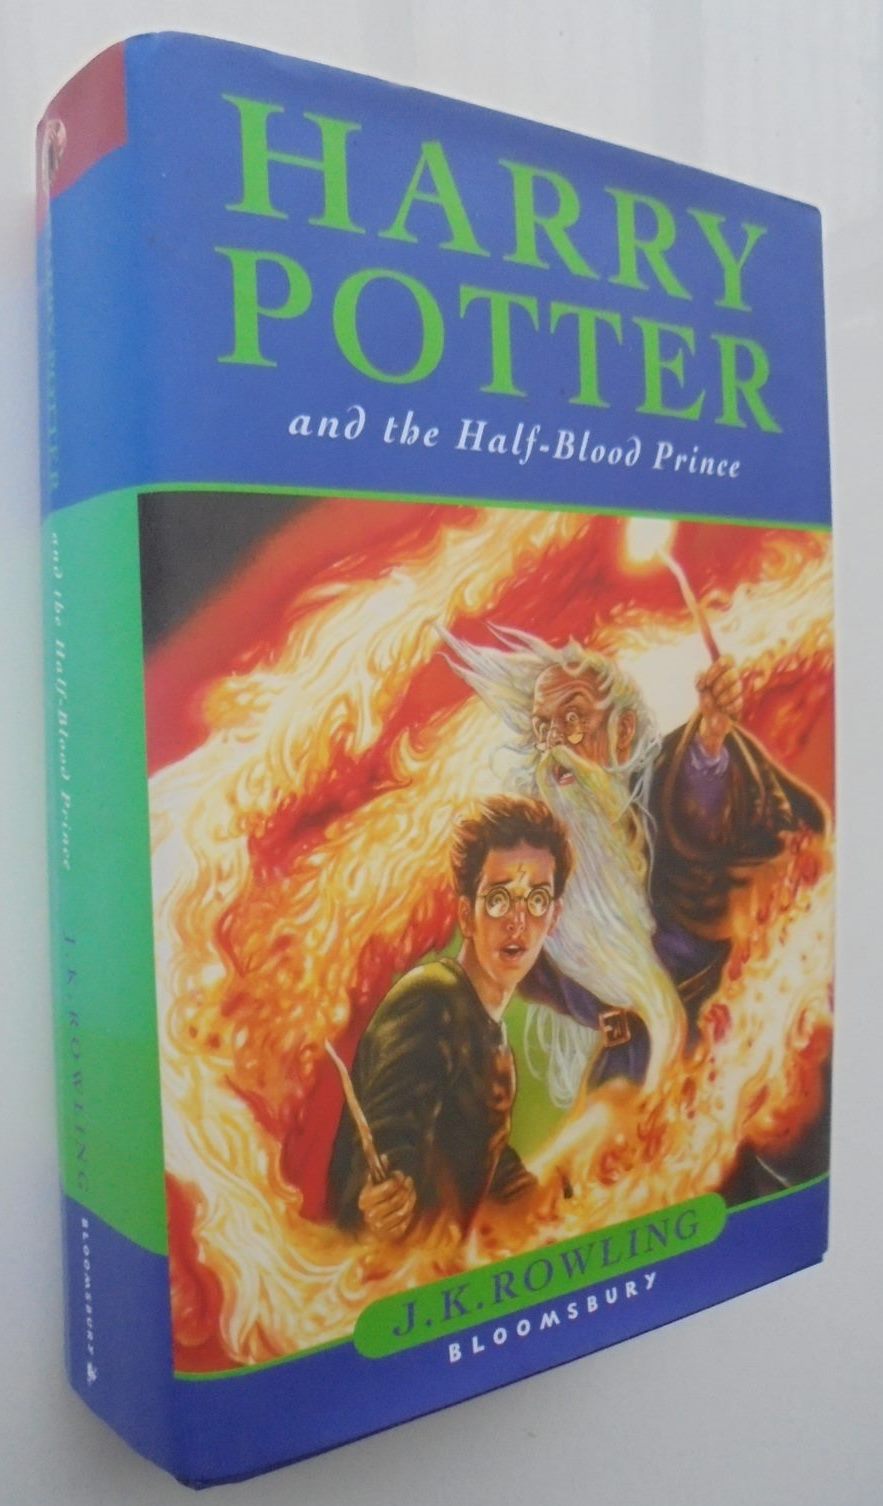 Harry Potter and the Half-Blood Prince by J K ROWLING.